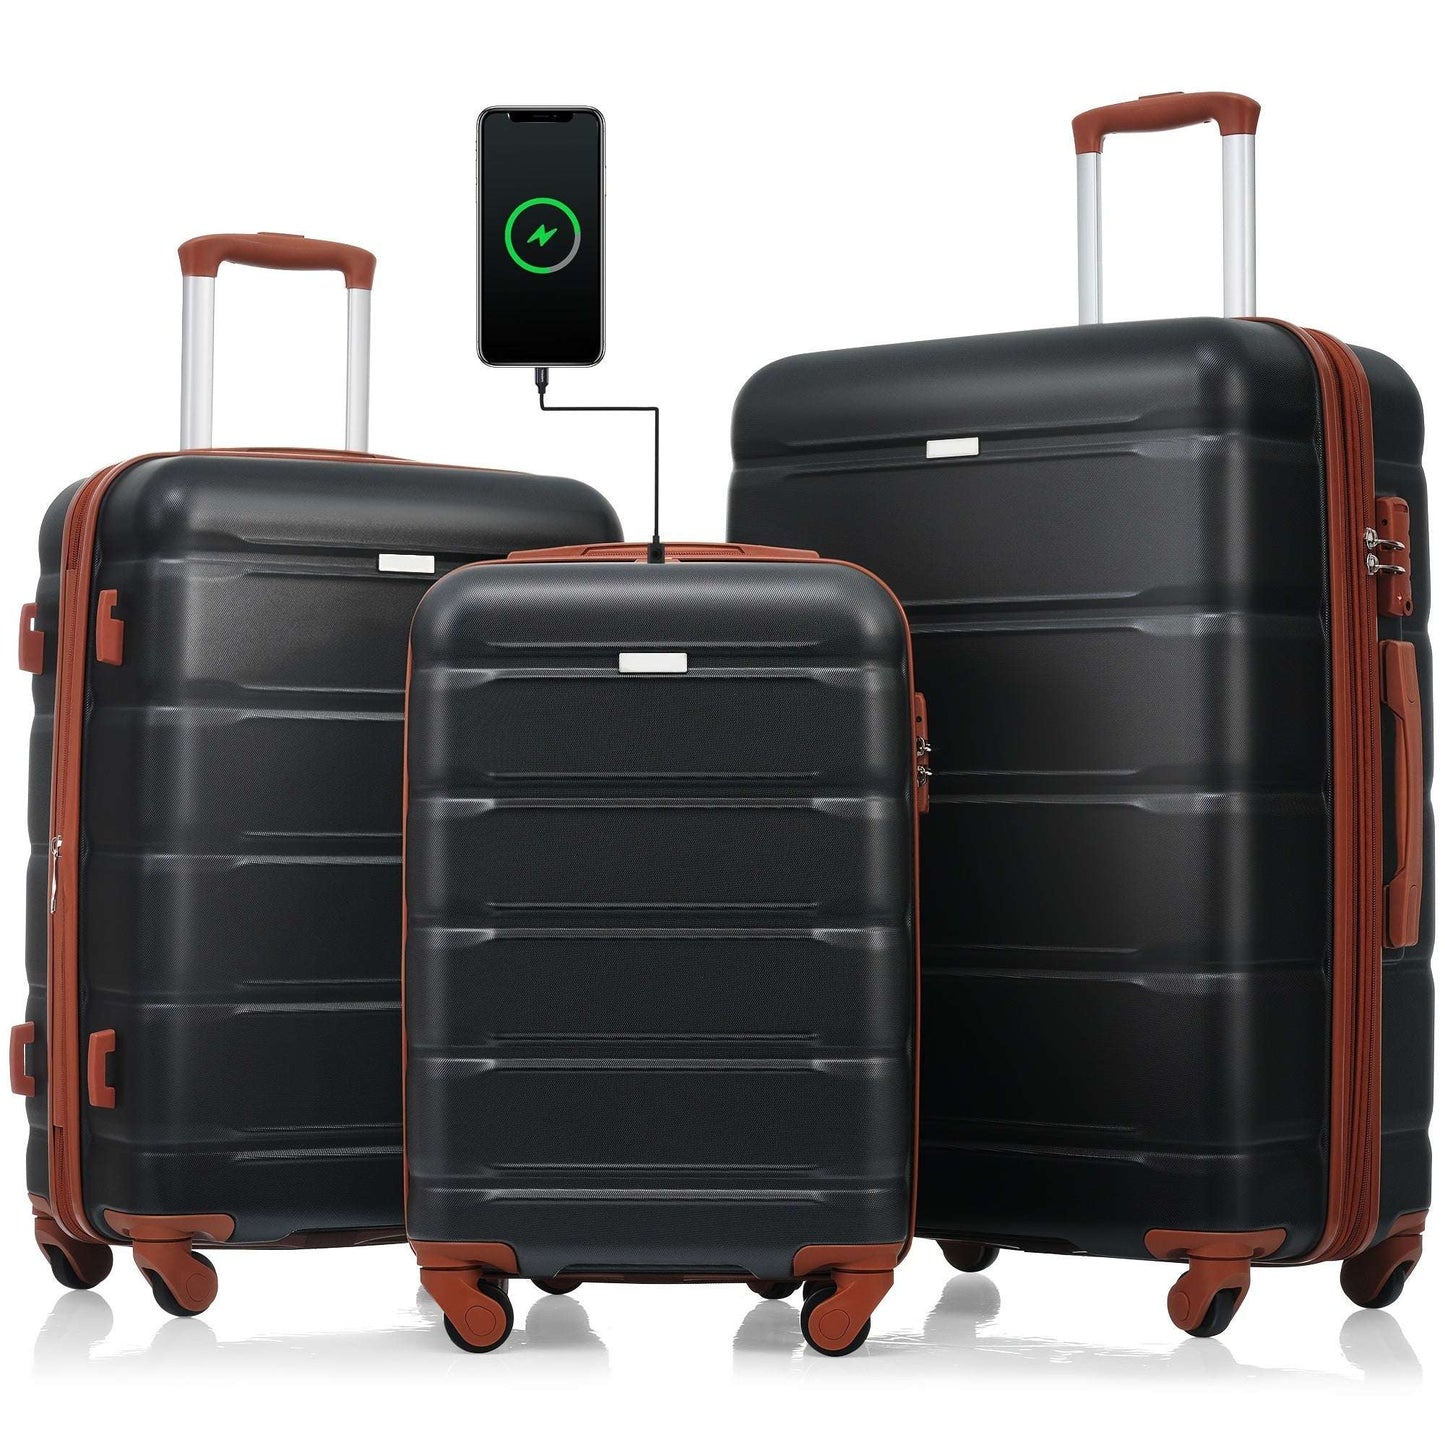 3-Piece Spacious Luggage Set - Airline-Approved Carry-On with Telescoping Handle, Spinner Wheels, and Combination Lock 139 Luggage OK•PhotoFineArt OK•PhotoFineArt